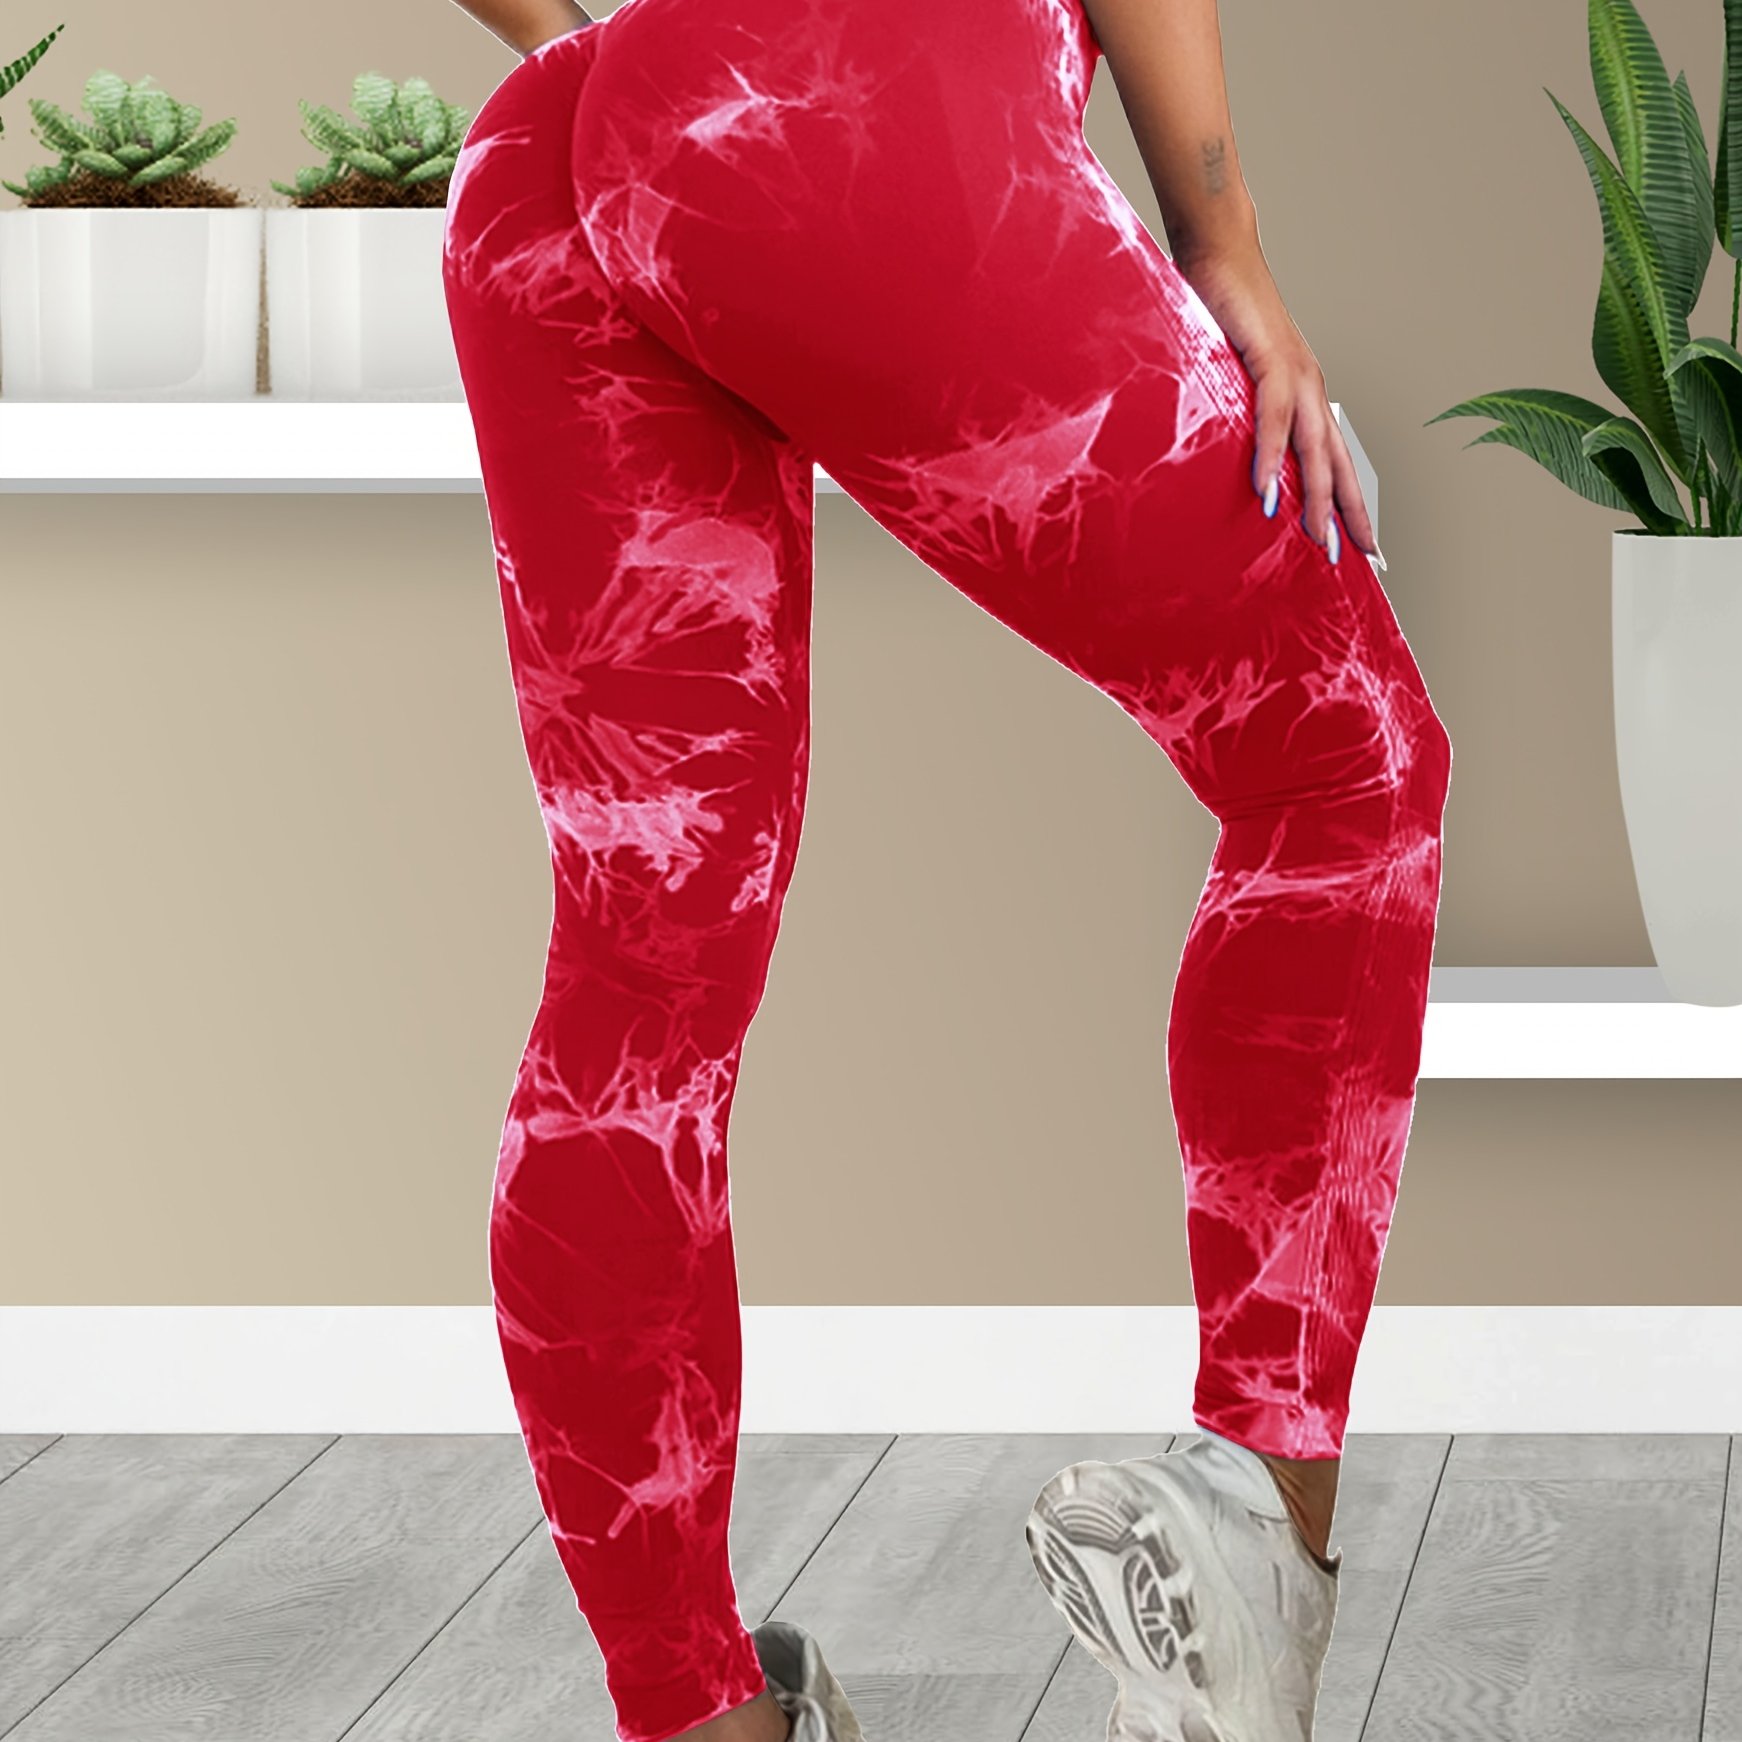 Tie Dye Stretchy Yoga Leggings, Slim Fit High Waist Fitness Workout Gym  Casual Pants, Women's Activewear